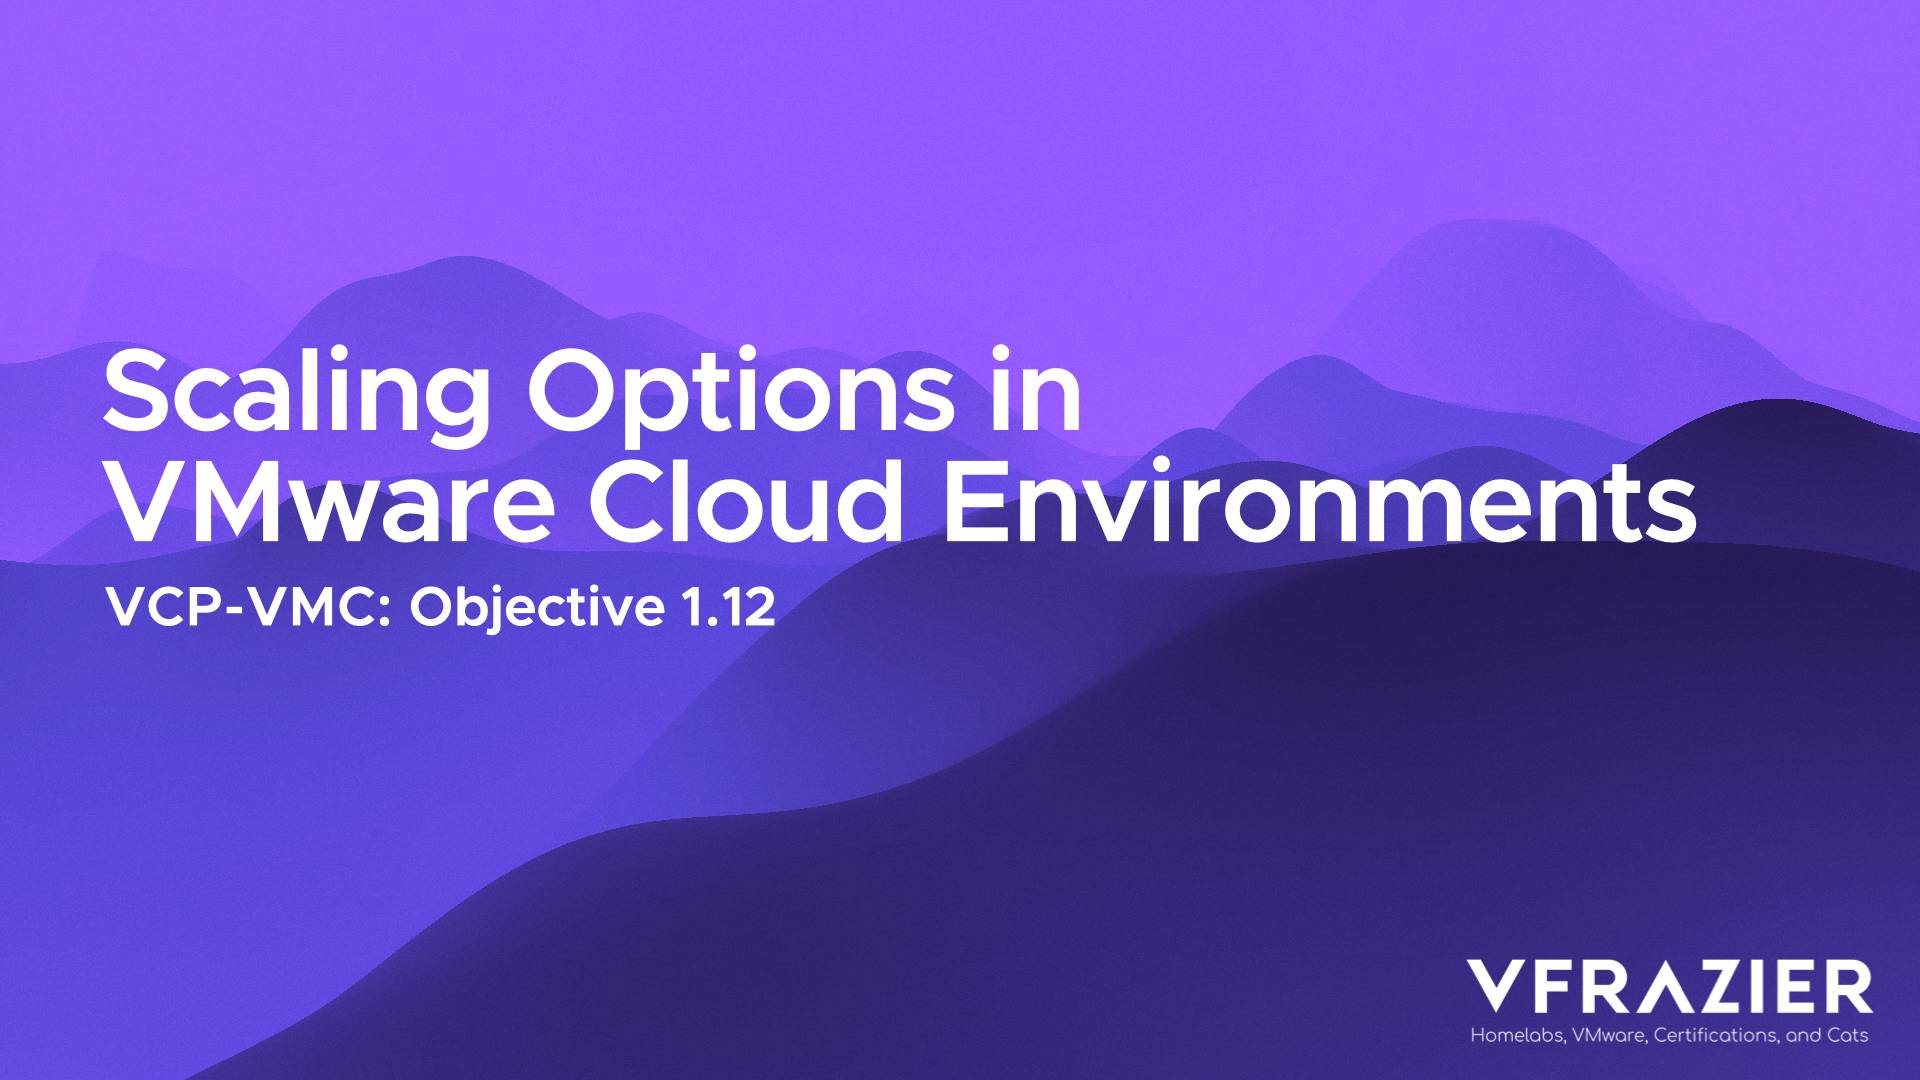 VCP-VMC 1.12: Explain scaling options in VMware Cloud environments